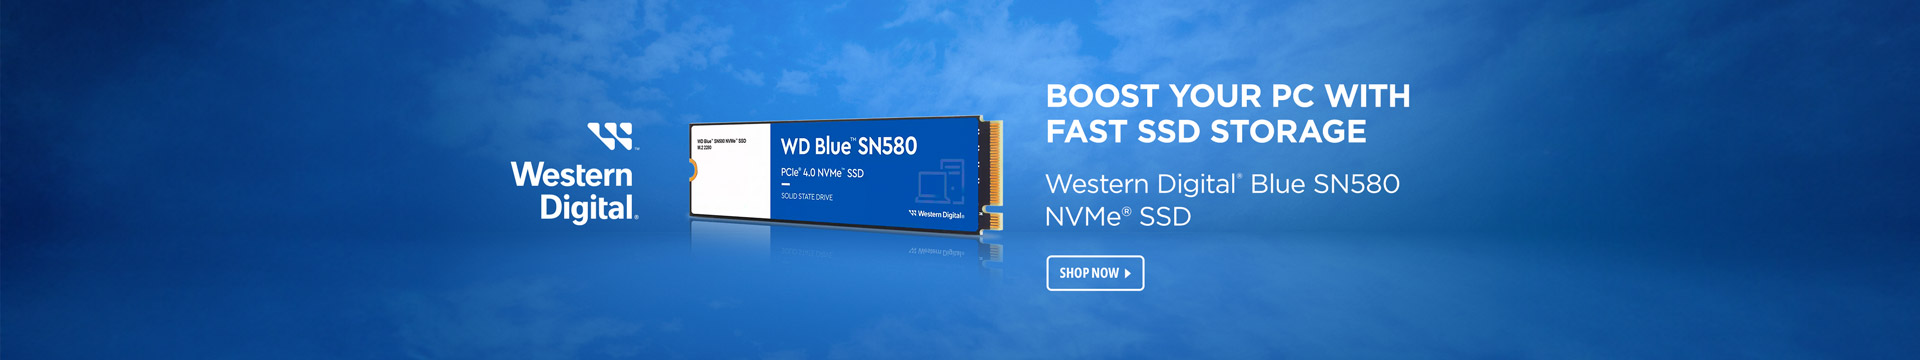 BOOST YOUR PC WITH FAST SSD STORAGE